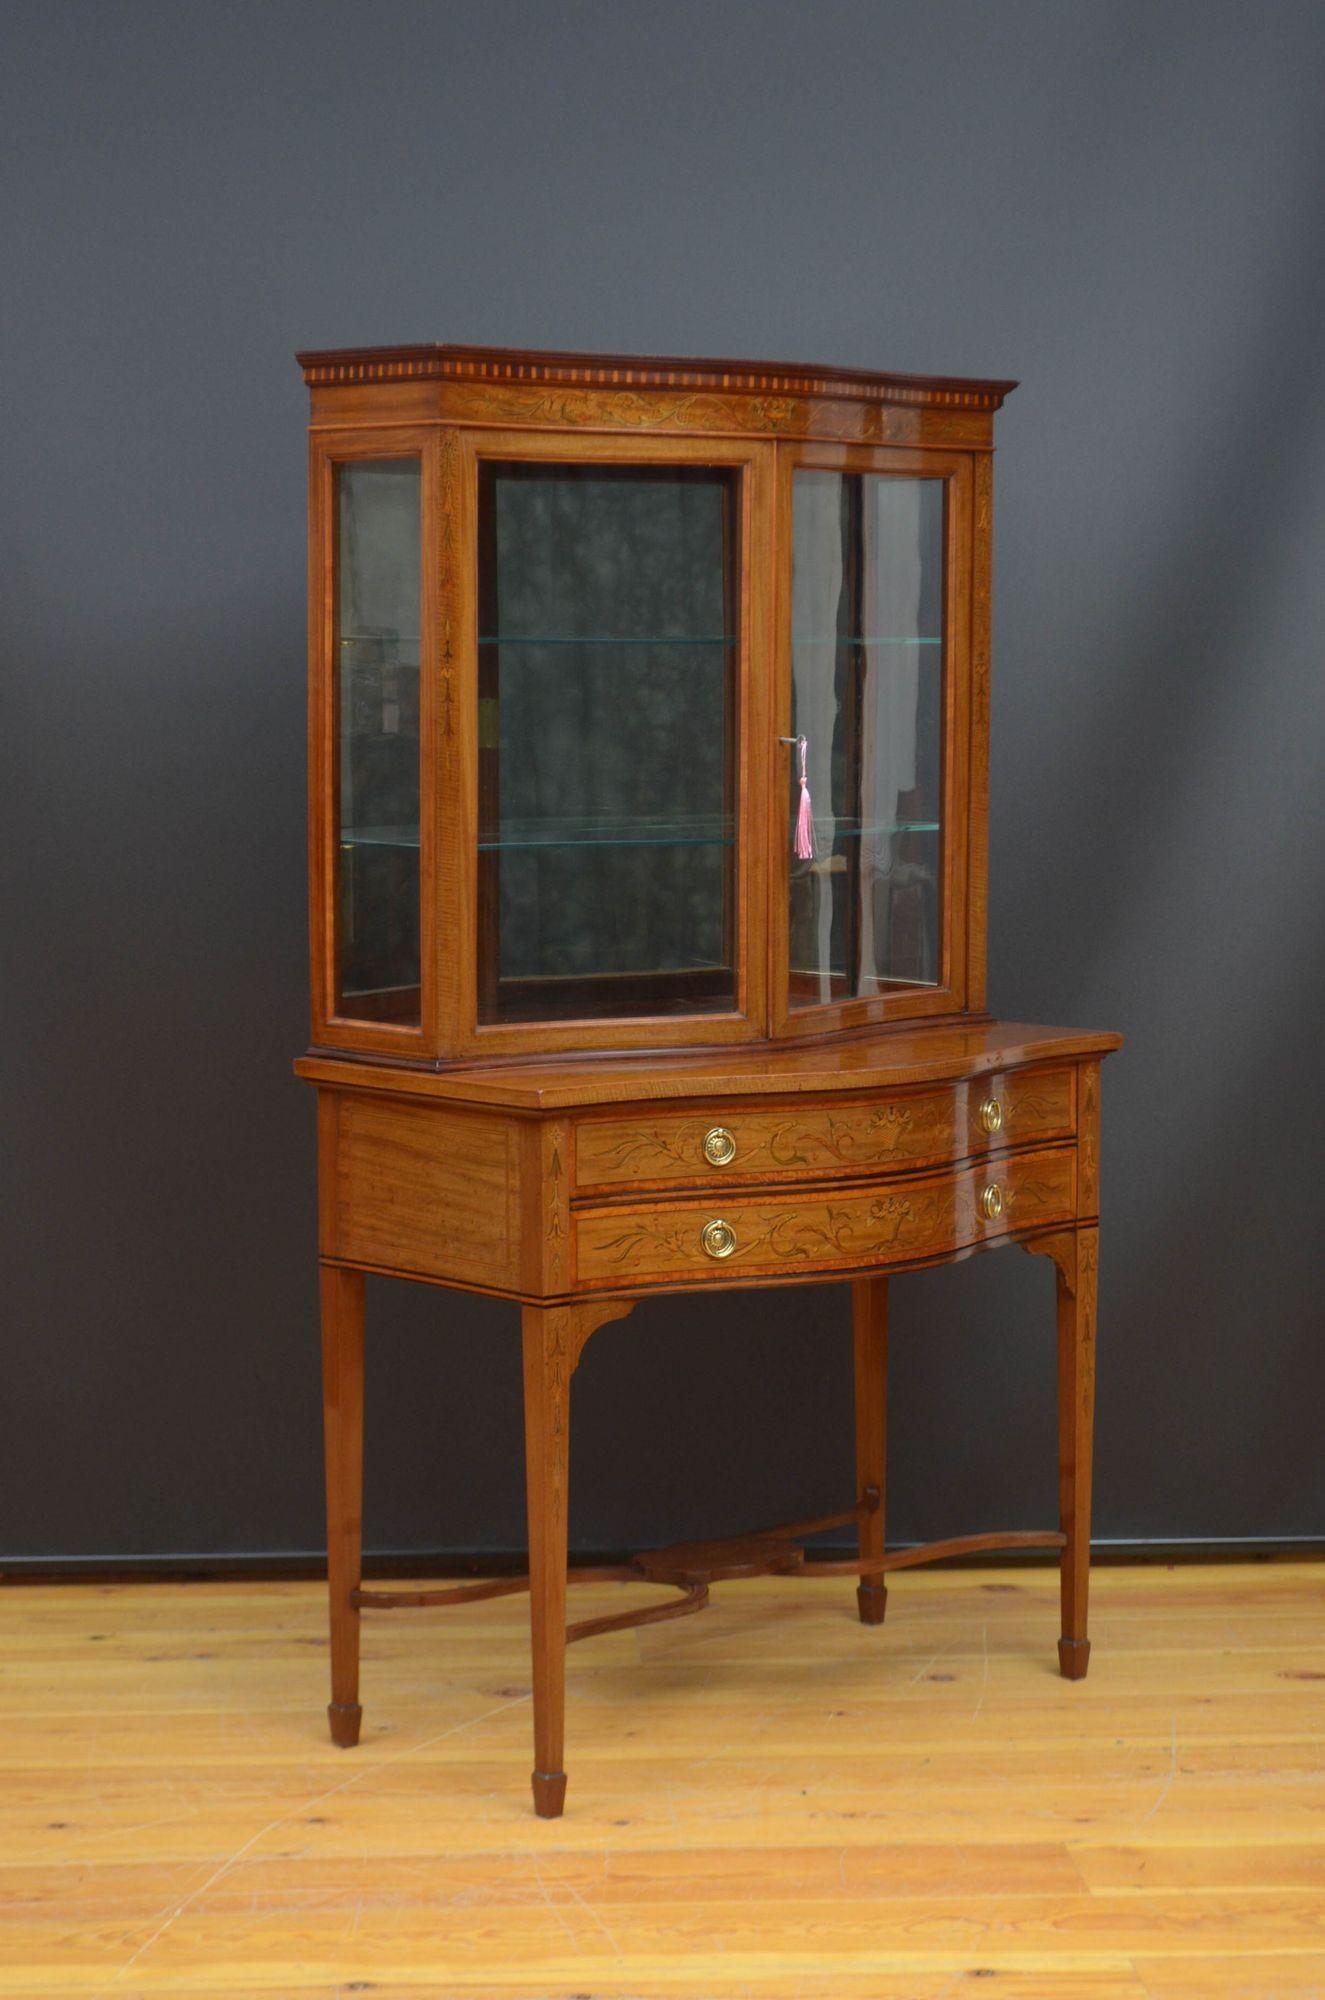 Sn5504 Fine quality Edwardian mahogany and inlaid vitrine of serpentine design, having polished top with dentil inlaid moulding above floral inlaid frieze and a pair of glazed door fitted with original working lock and a key and enclosing two